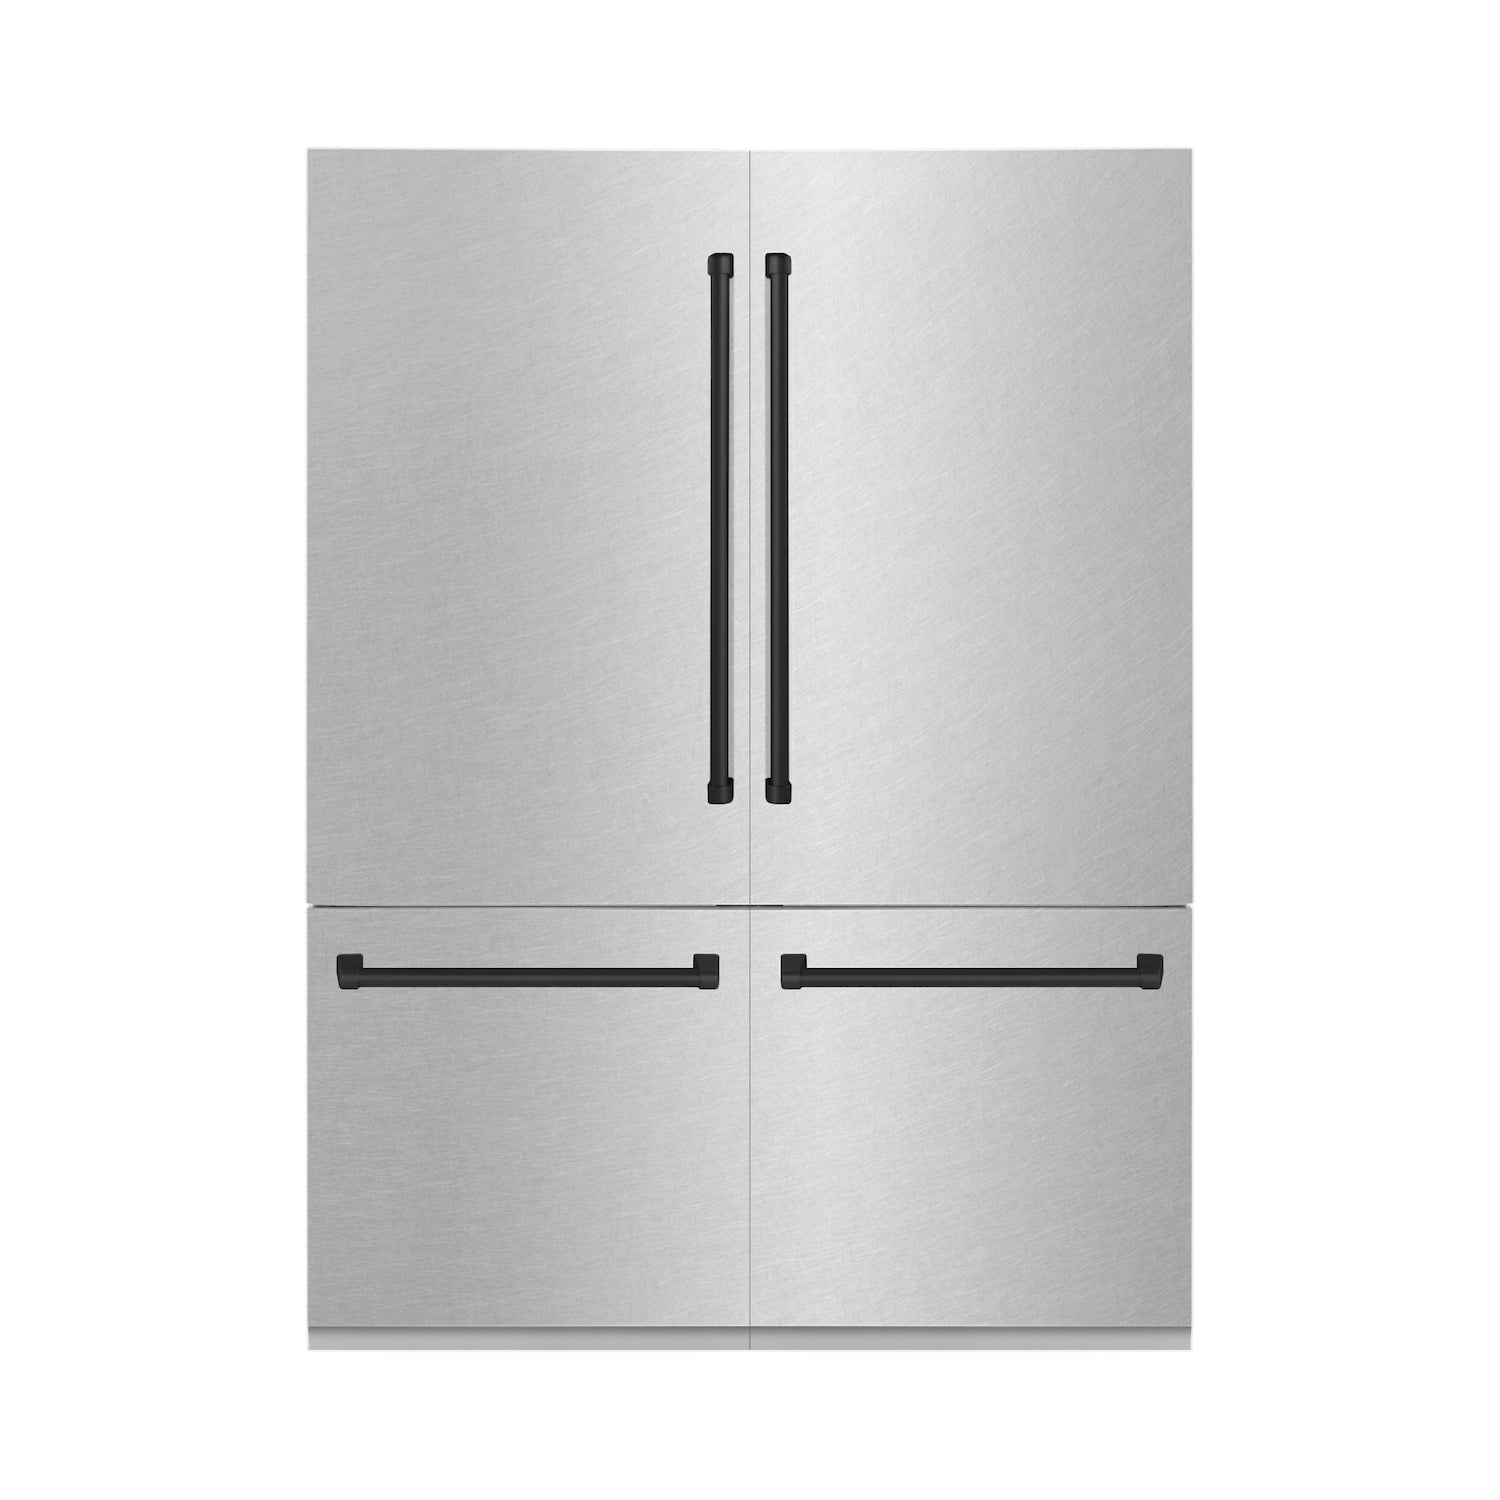 ZLINE Autograph Edition 60 in. 32.2 cu. ft. Built-in 4-Door French Door Refrigerator with Internal Water and Ice Dispenser in Fingerprint Resistant Stainless Steel with Matte Black Accents (RBIVZ-SN-60-MB) 